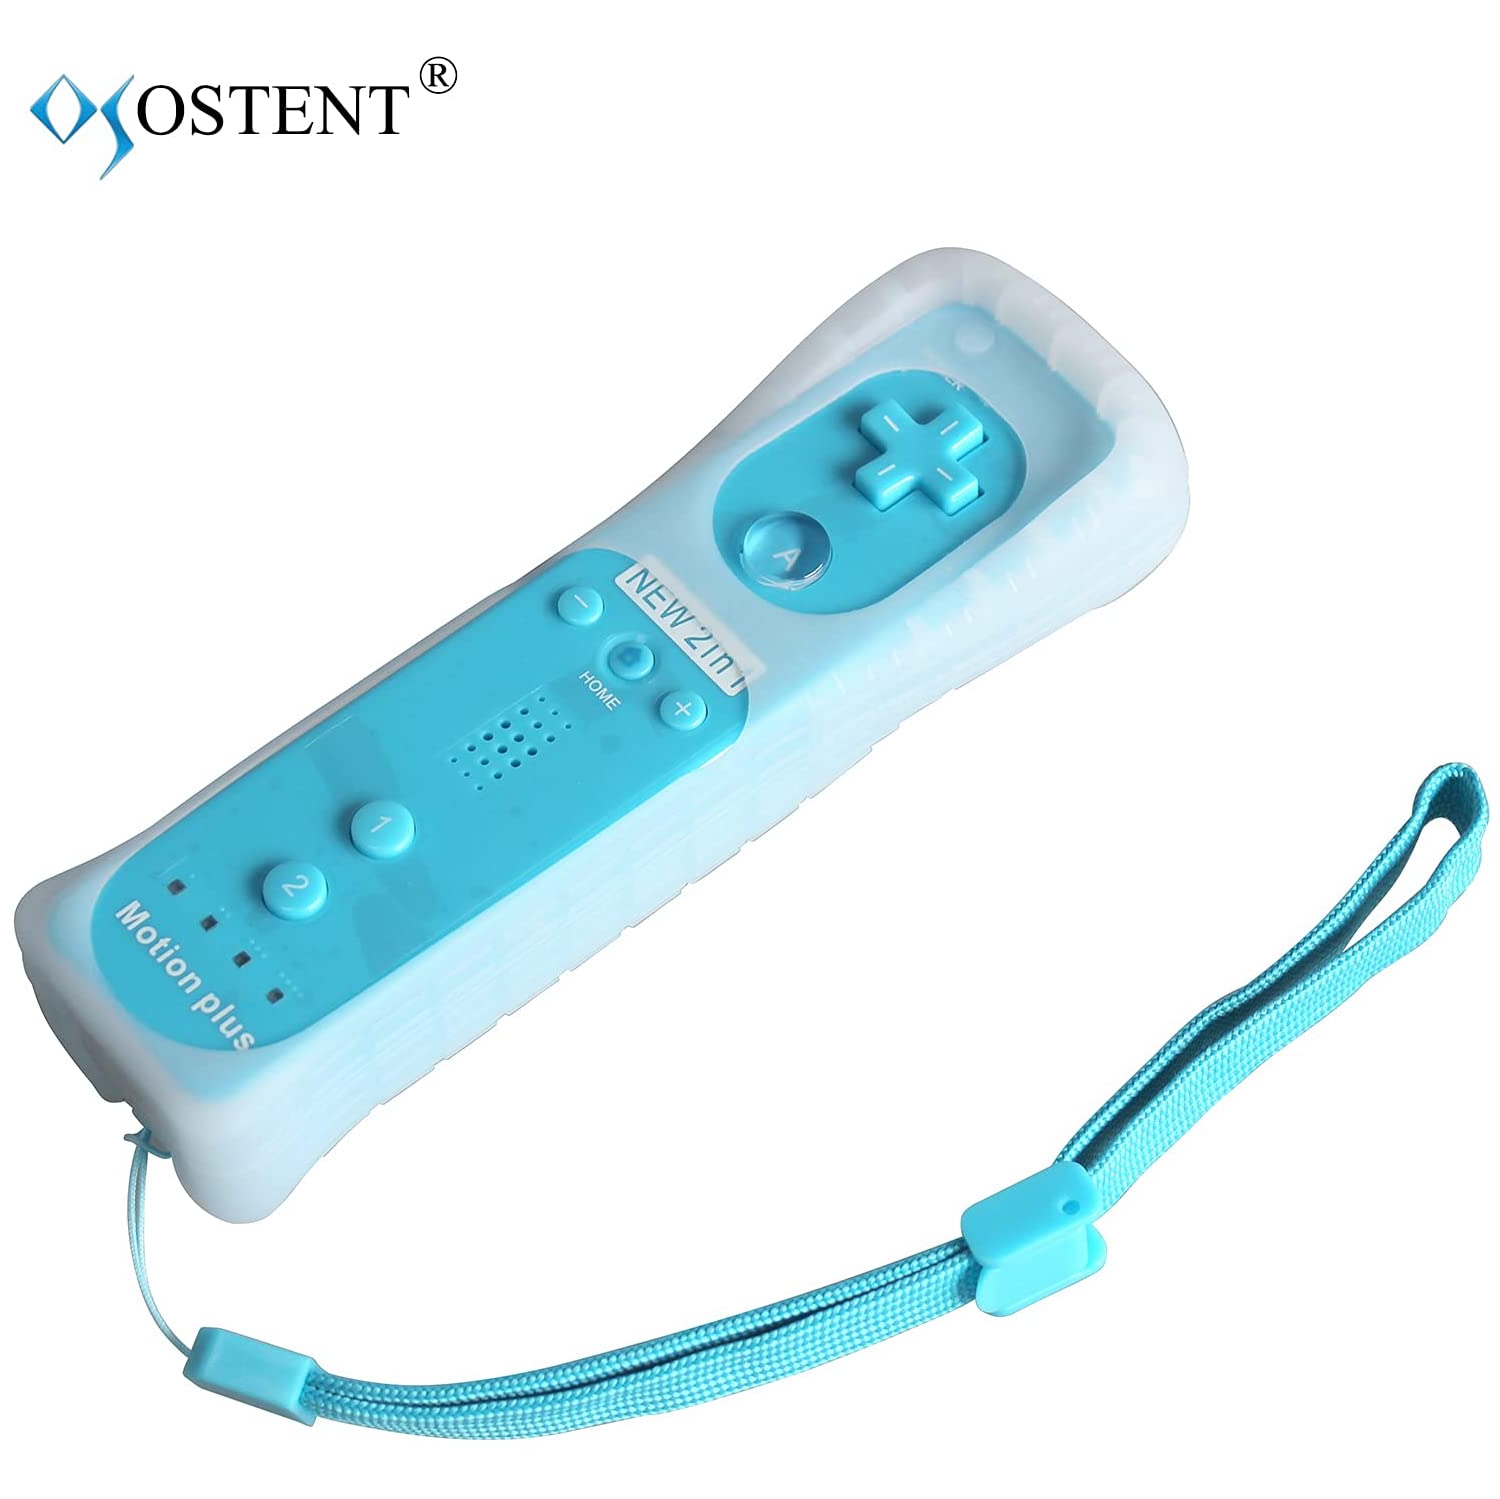 2 in 1 Remote Controller Built in Motion Plus Compatible for Nintendo Wii Console Game Color Blue